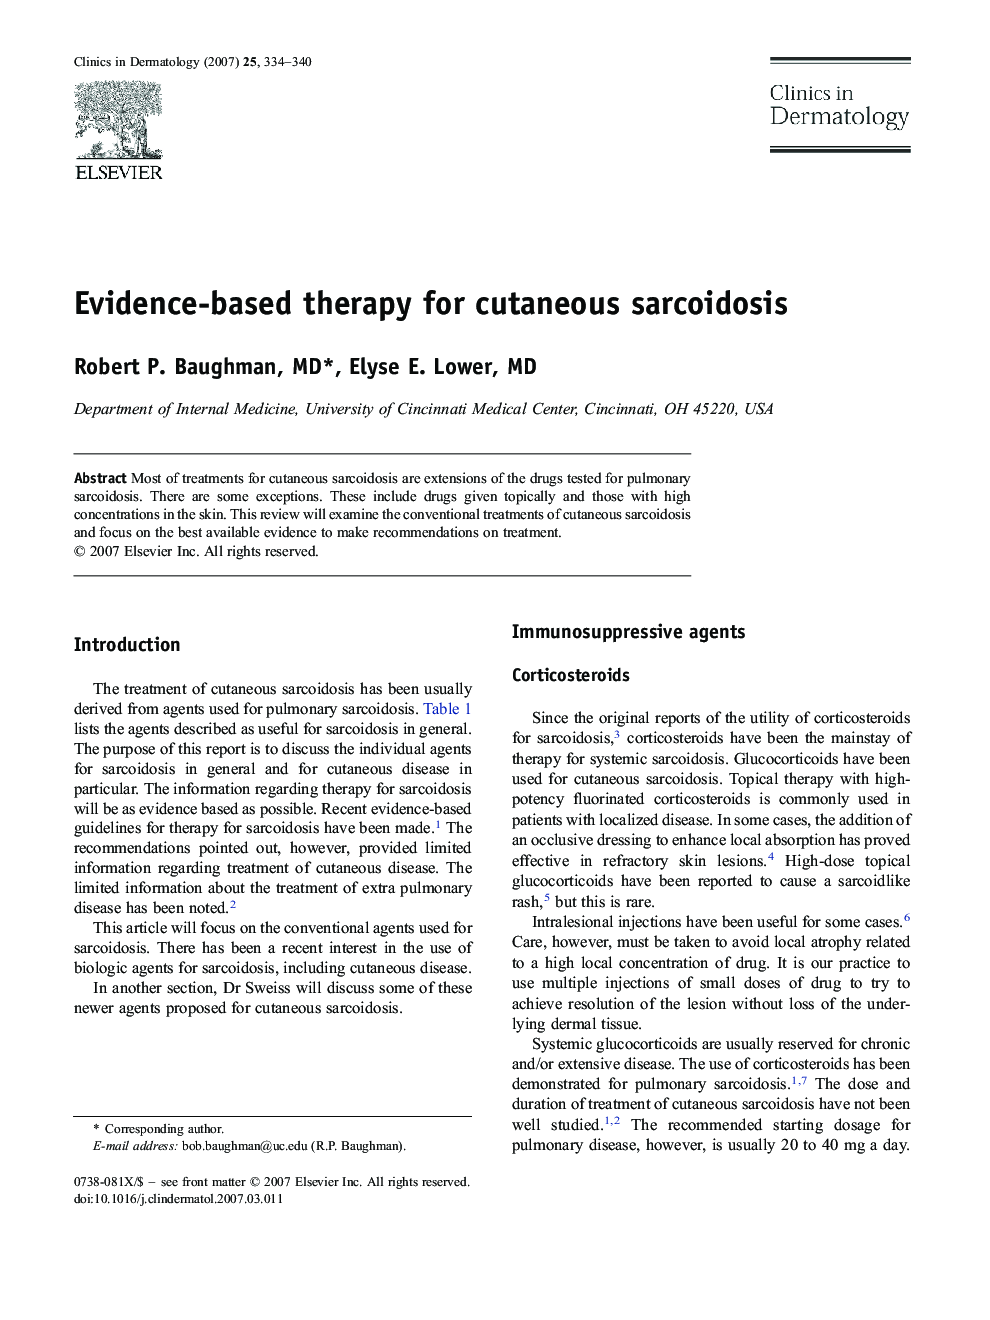 Evidence-based therapy for cutaneous sarcoidosis